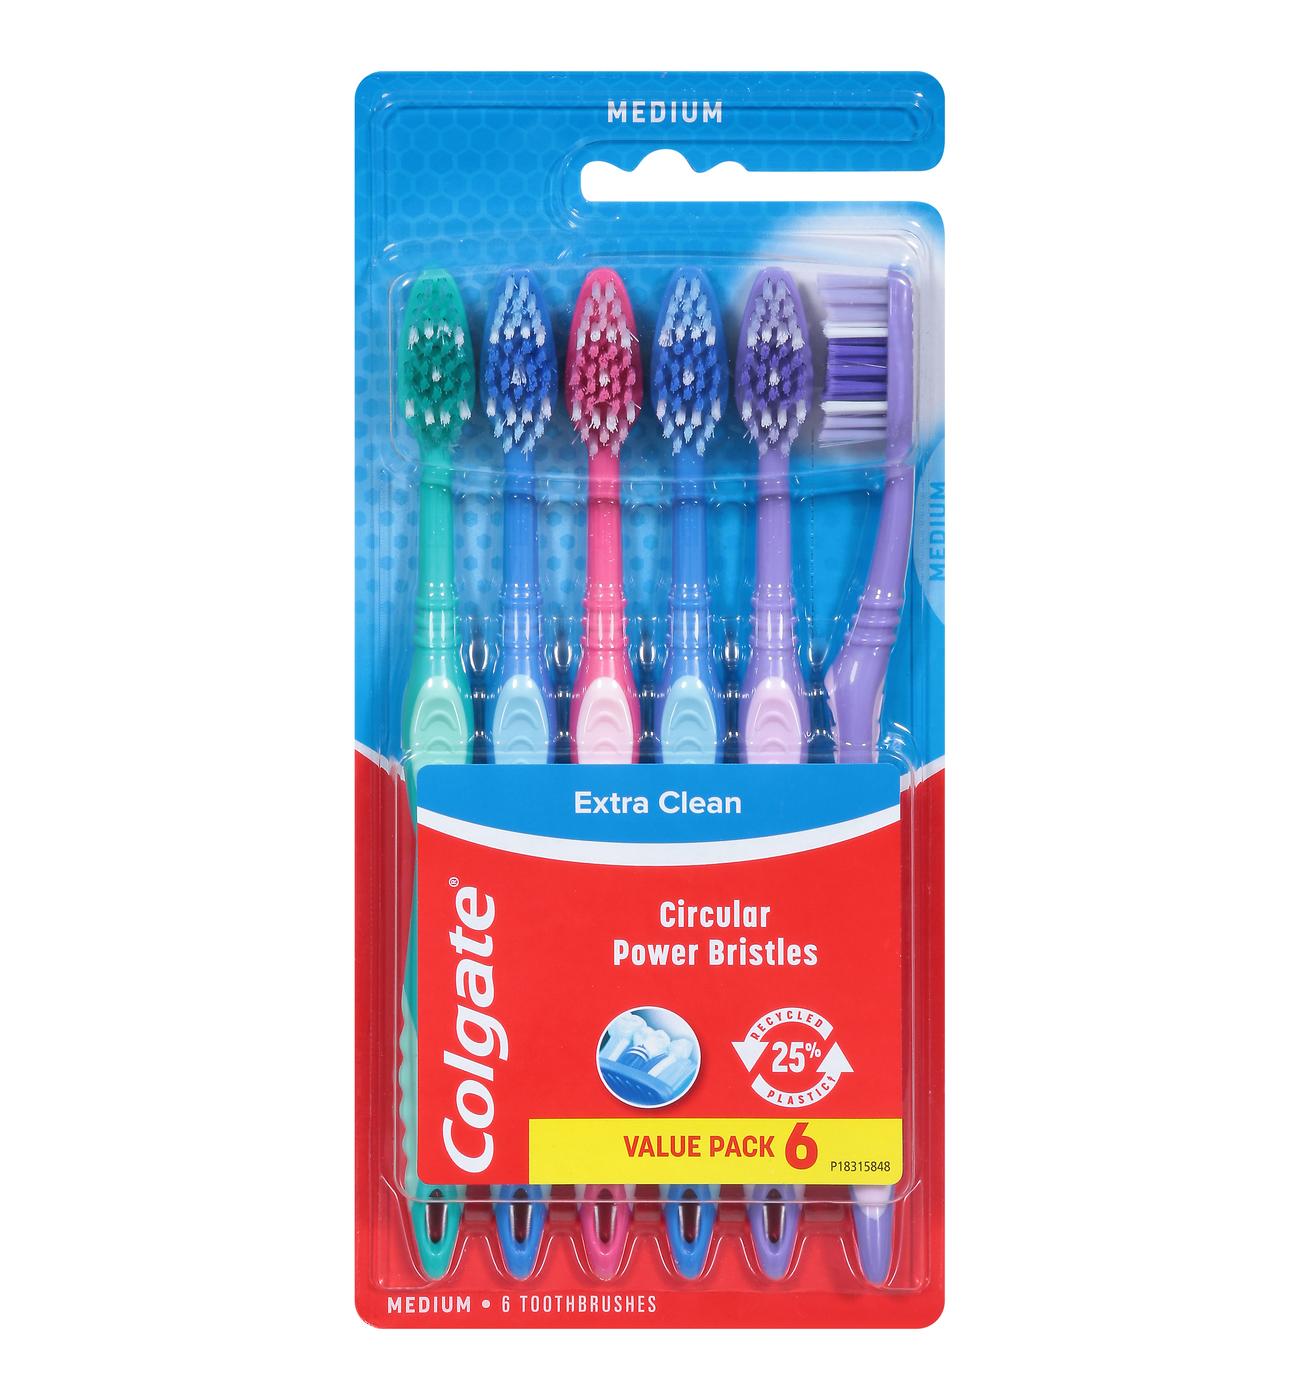 Colgate Extra Clean Toothbrushes - Medium; image 1 of 8